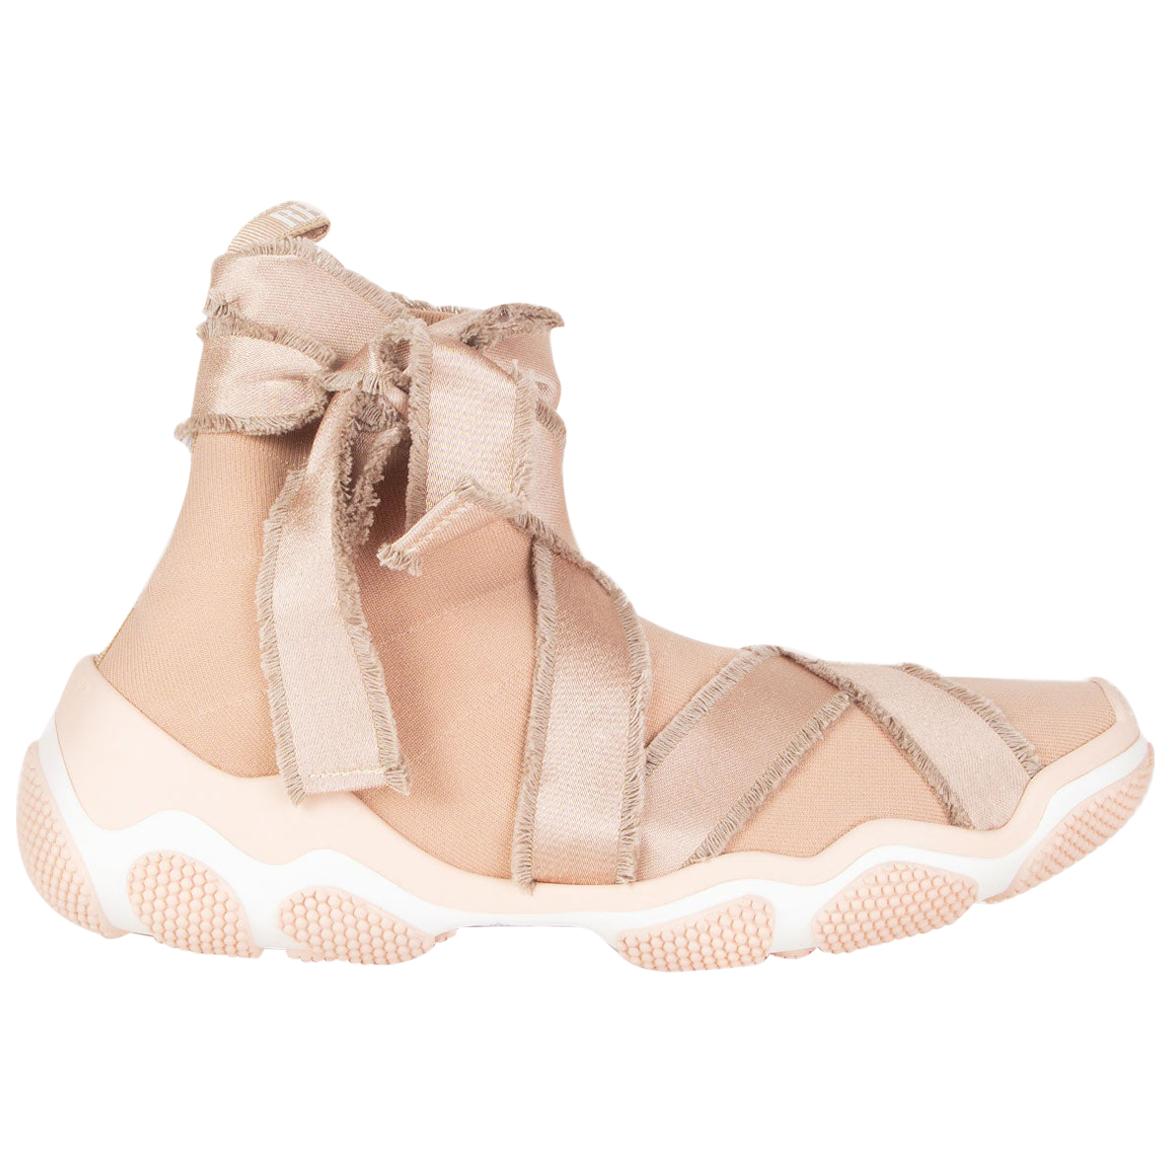 RED VALENTINO pink mesh GLAM RUN High-Top Sneakers Shoes 40